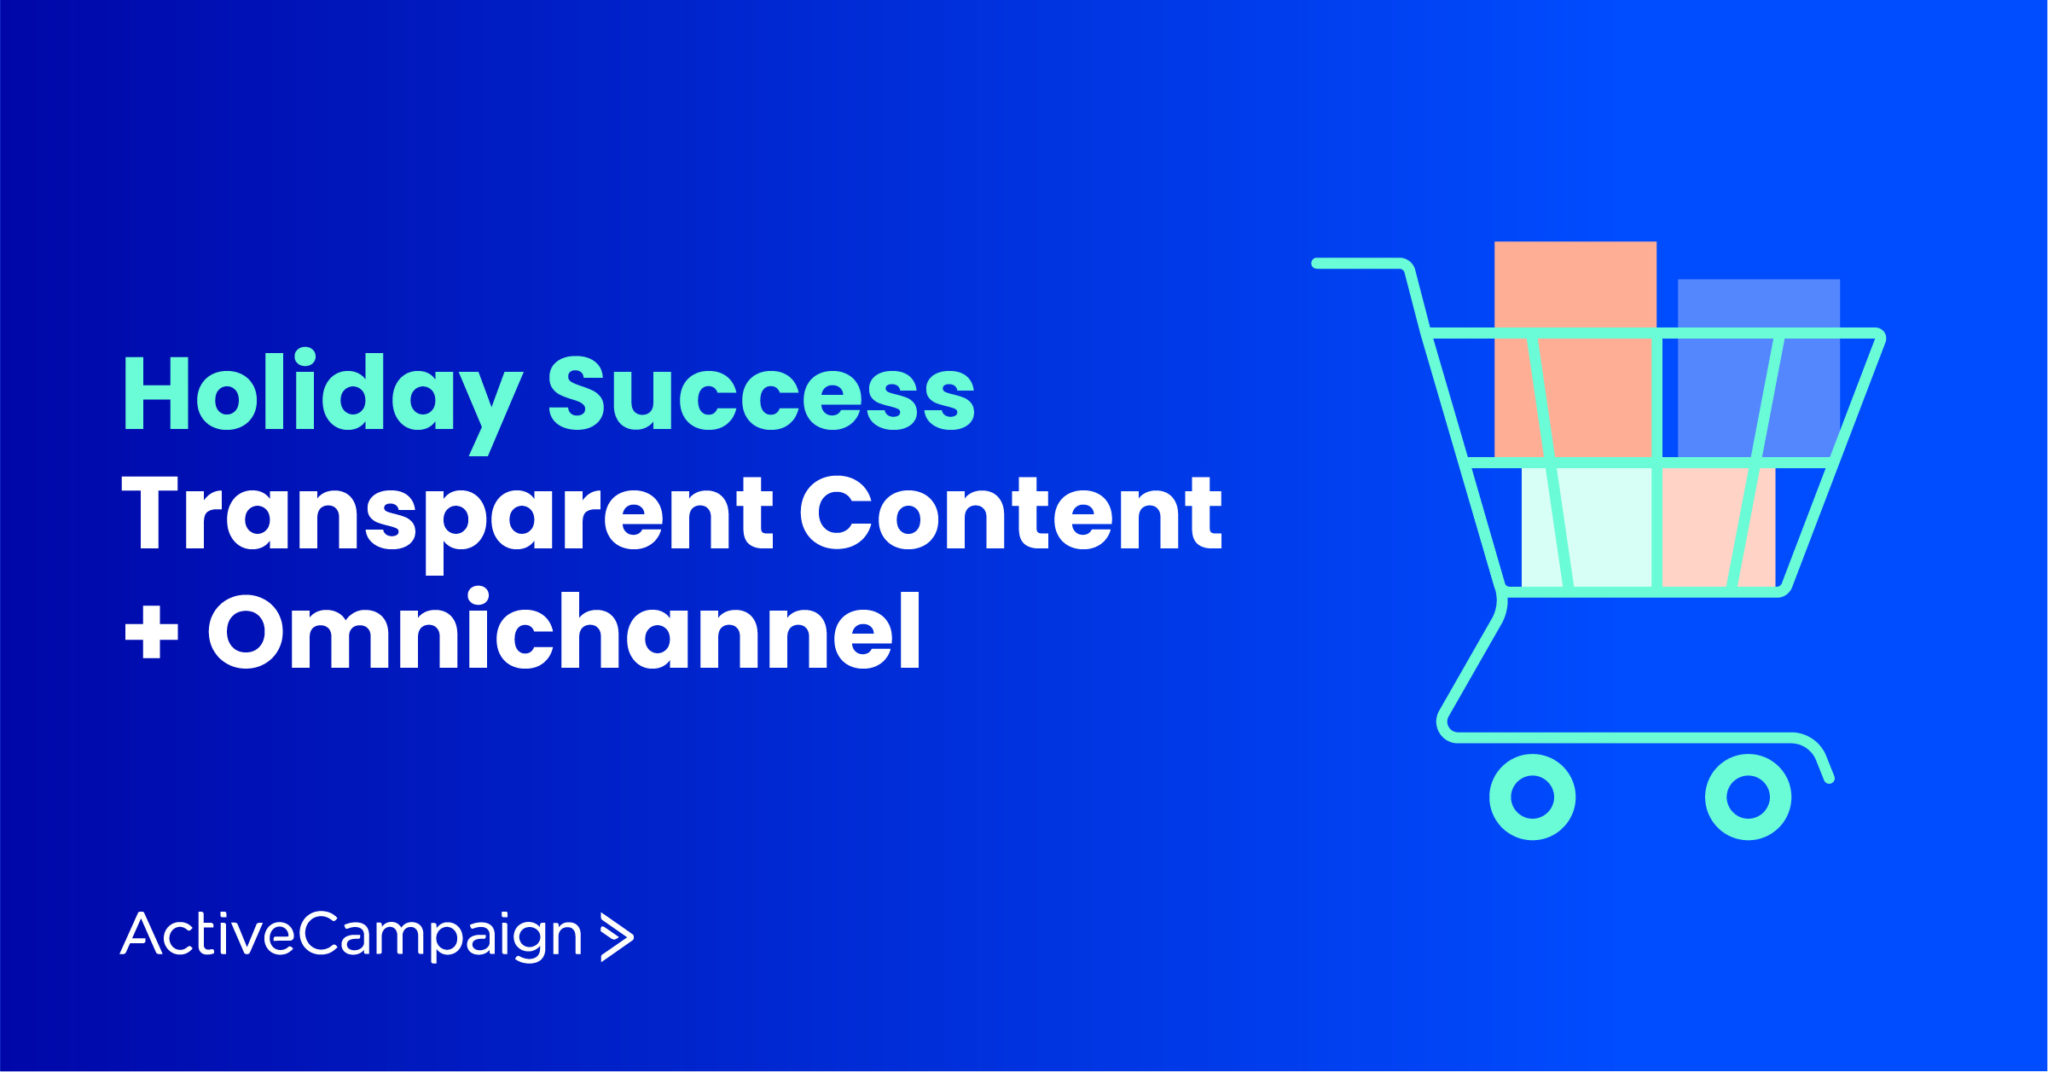 Omnichannel Approach Is the Key to Success This Holiday Season